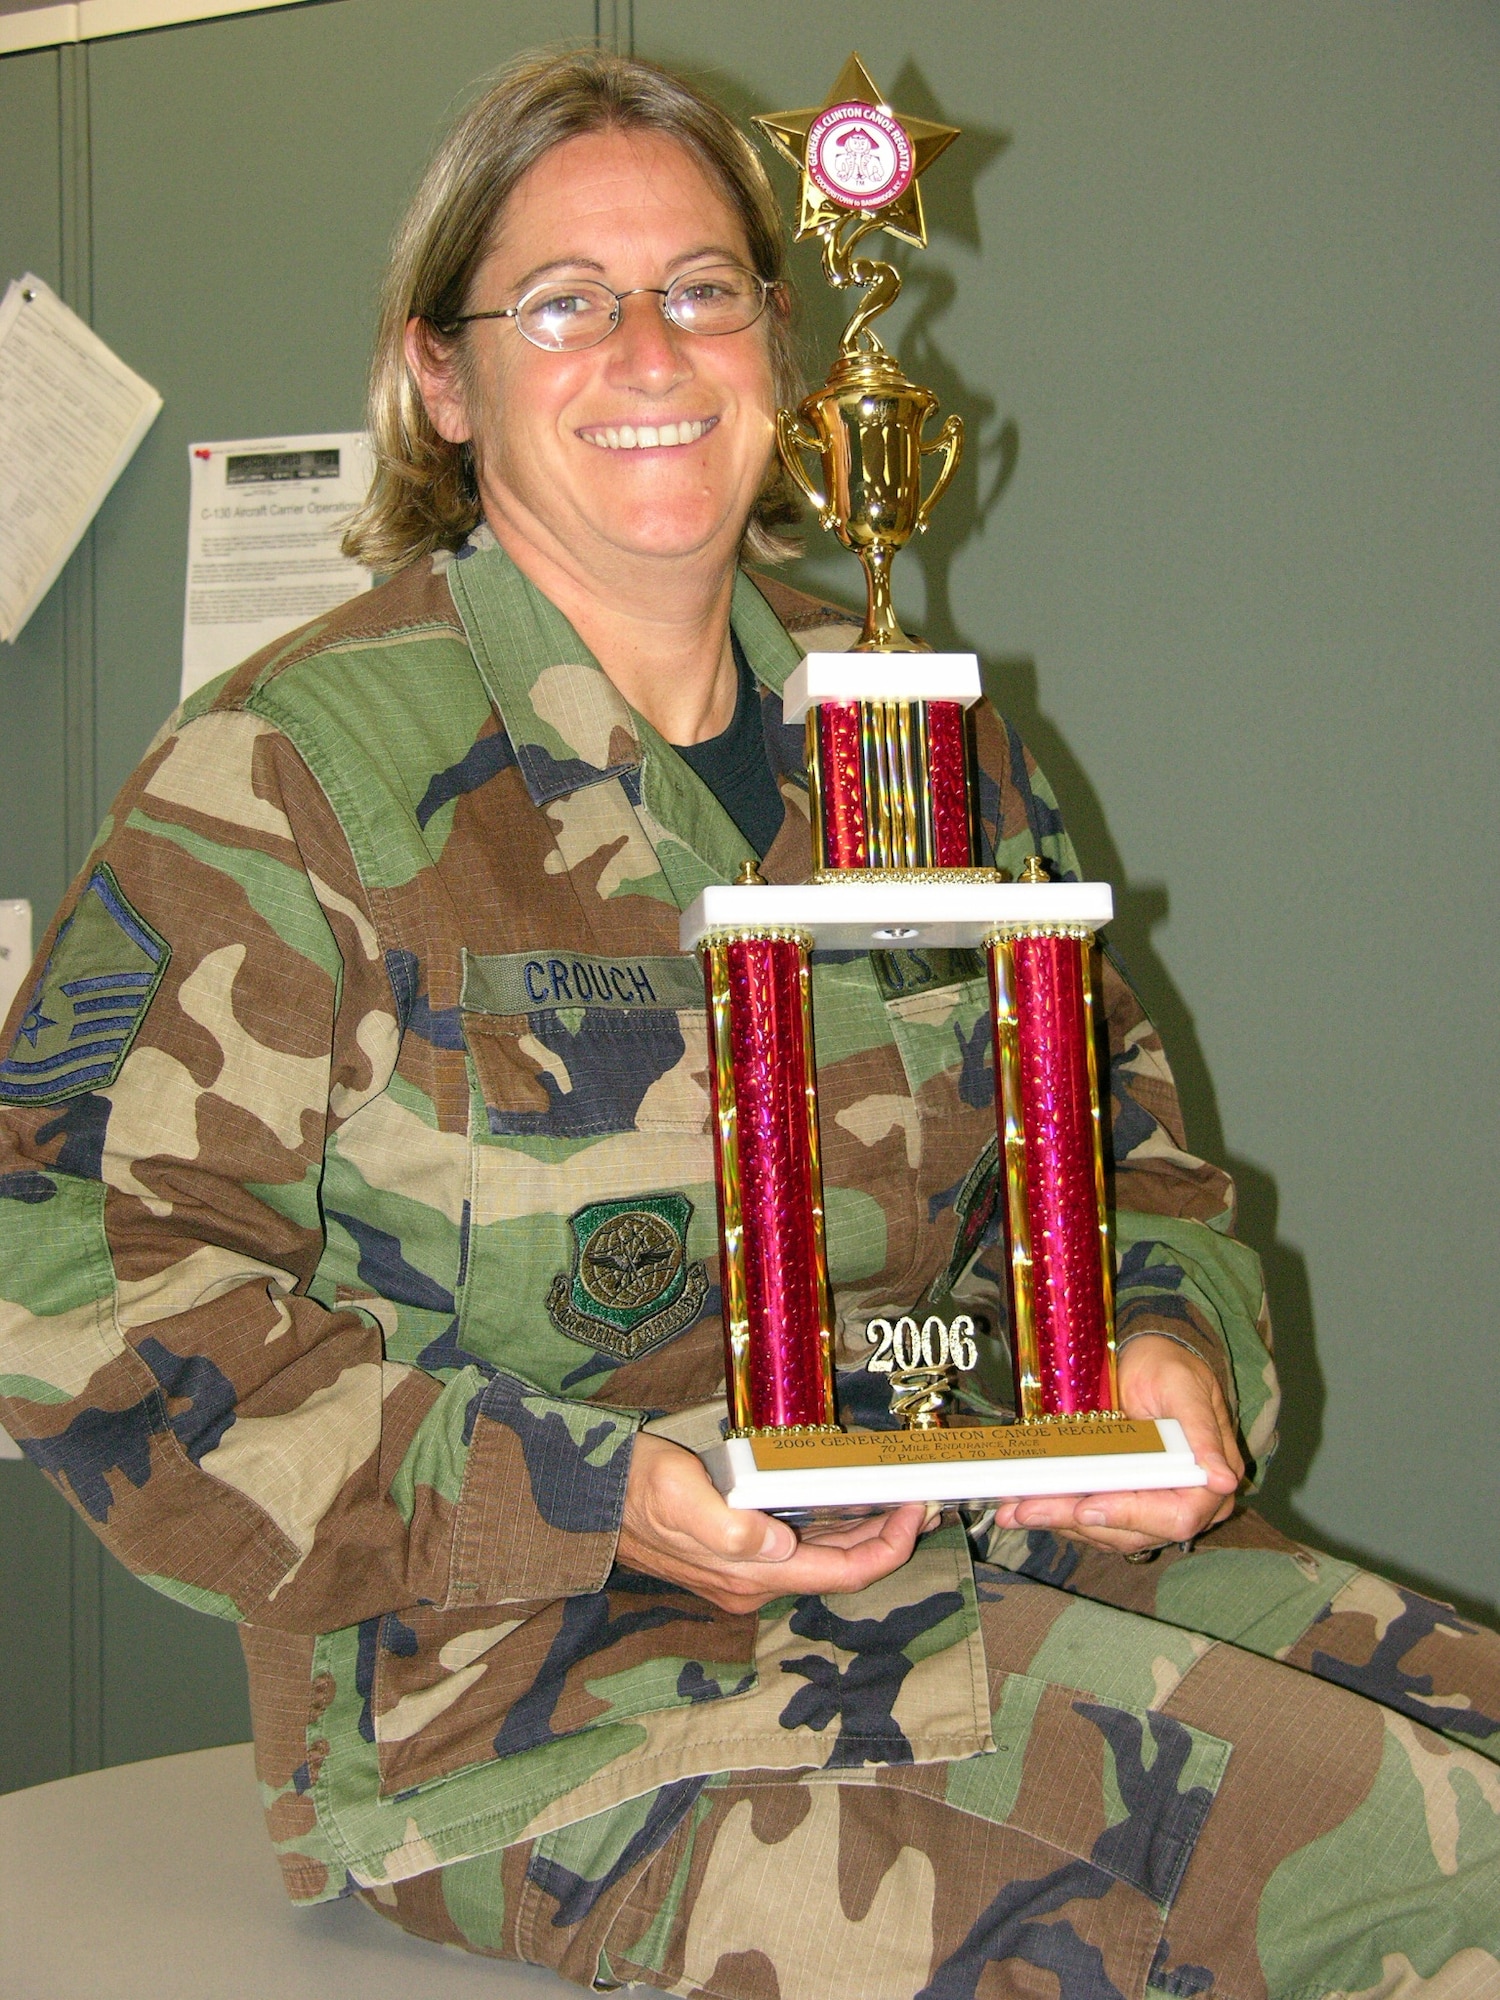 Master Sgt. Helen Crouch holds a trophy she won from a recent canoe regatta she paddled in New York state. (Courtesy photo)